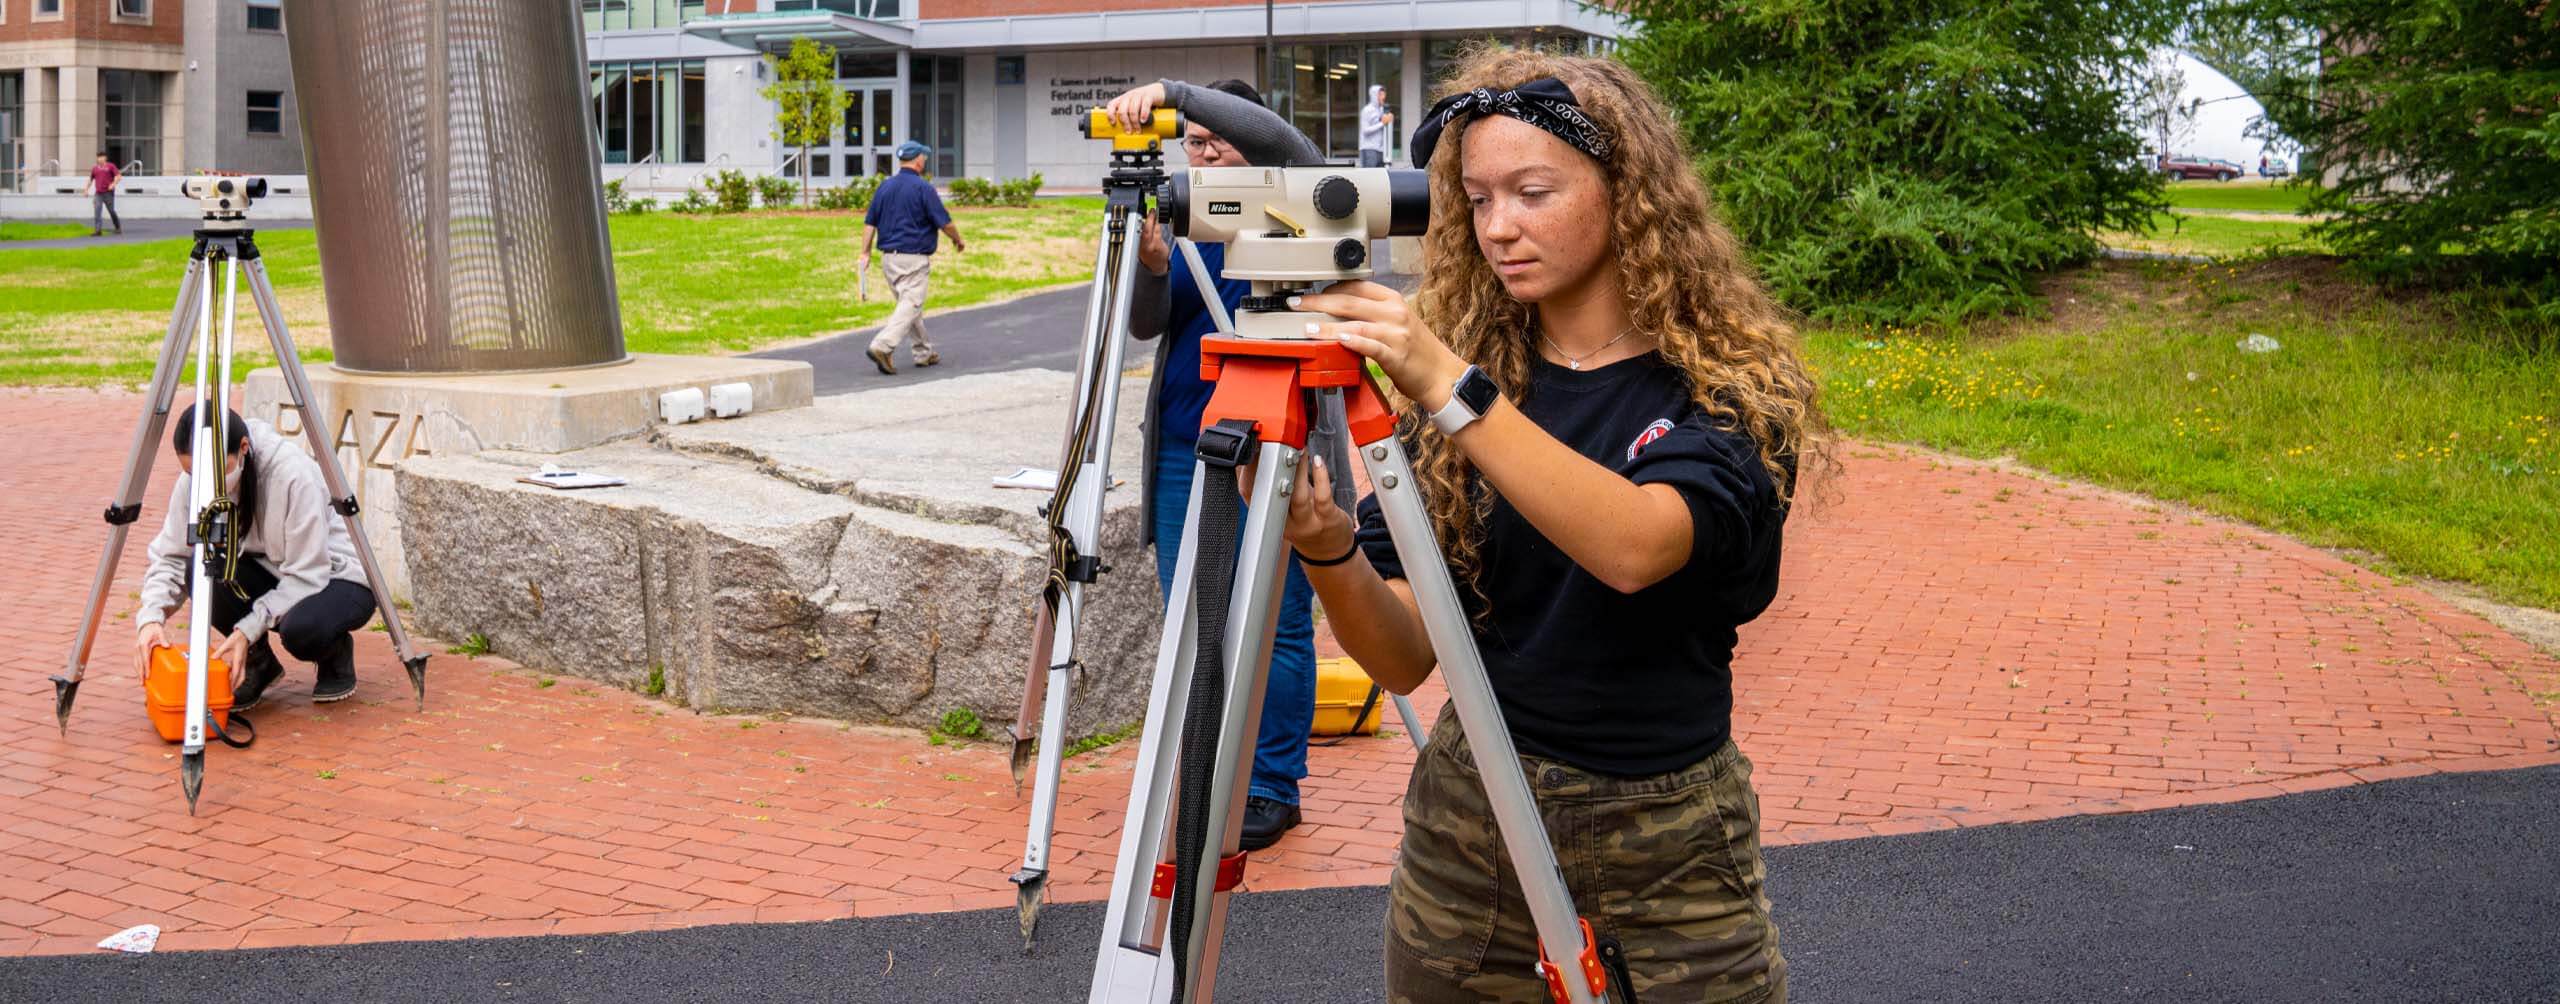 A photo of a student using surveying equipment